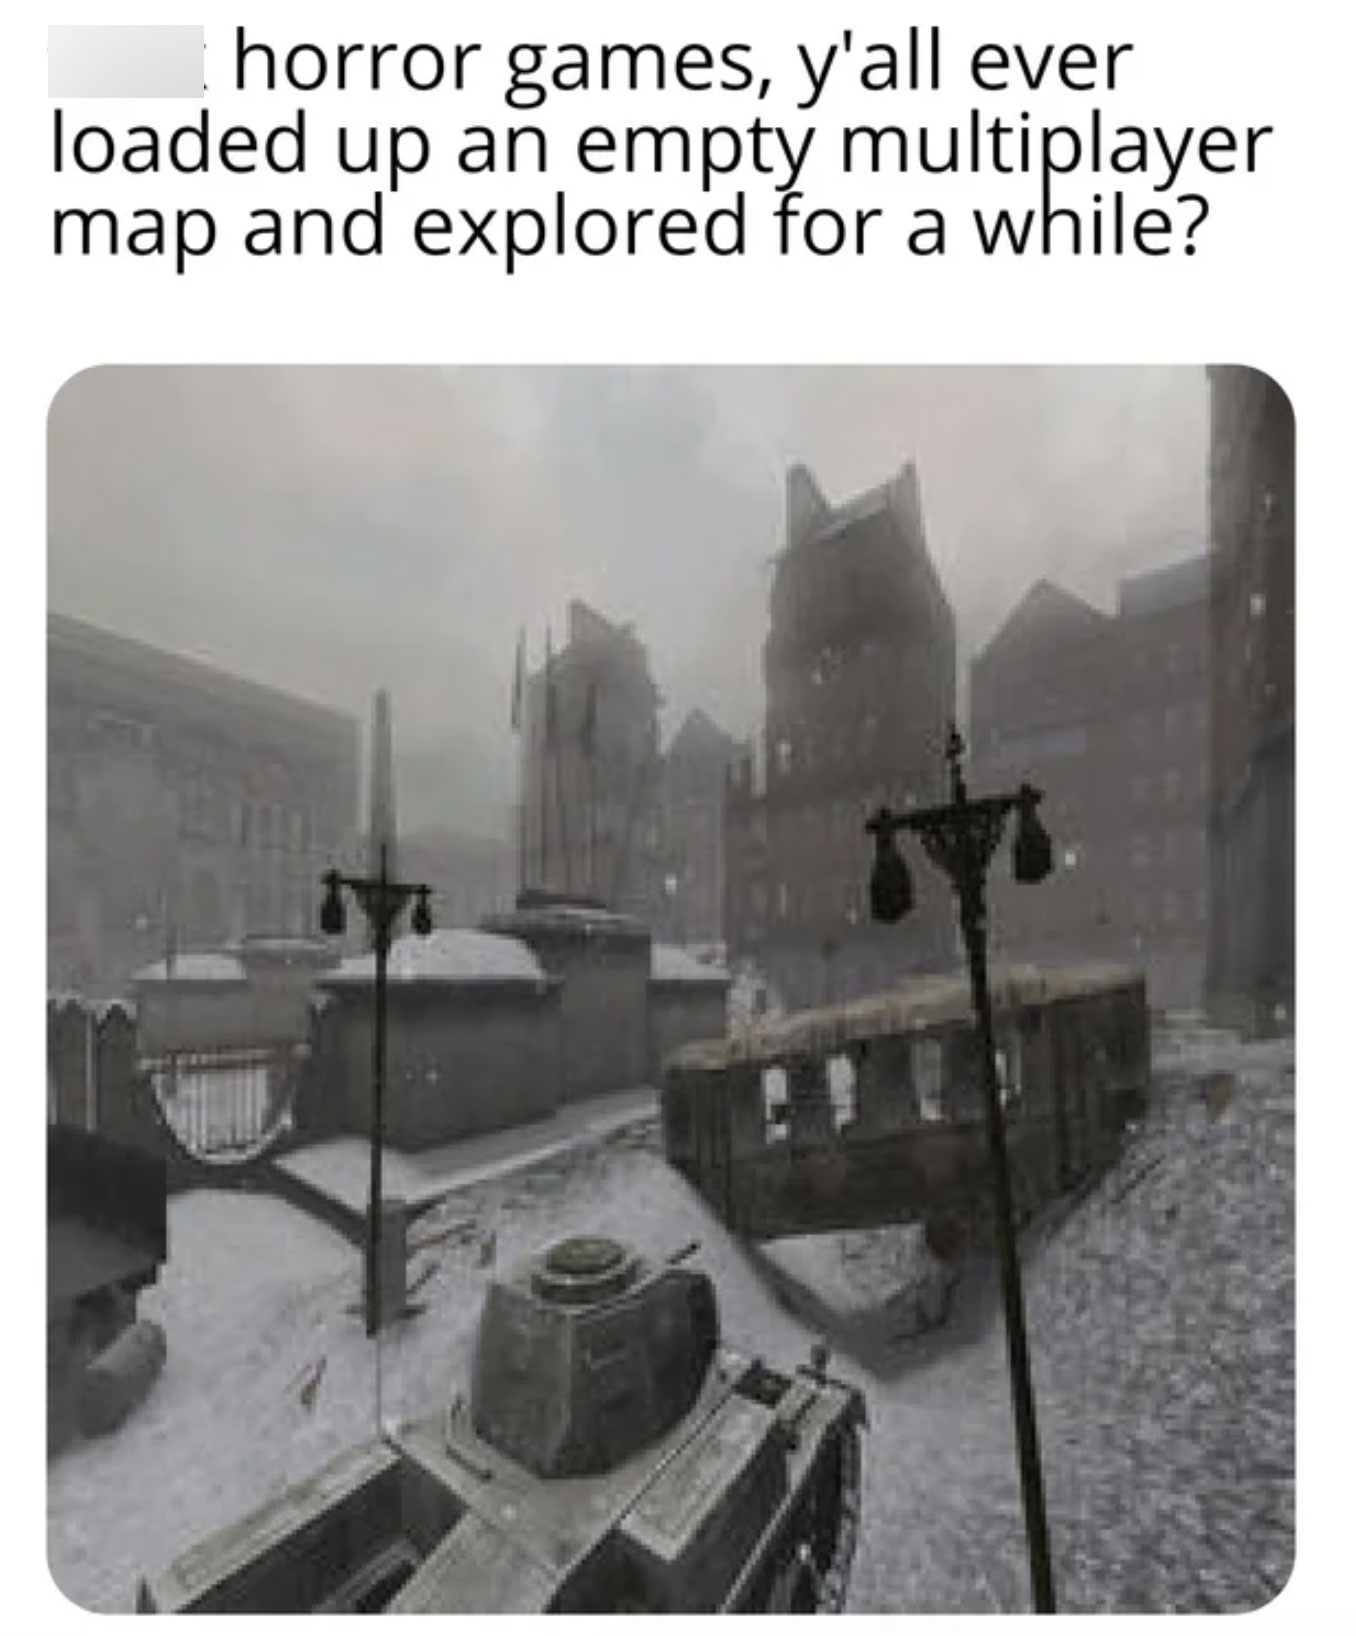 funny gaming memes  - call of duty 2 maps - horror games, y'all ever loaded up an empty multiplayer map and explored for a while?